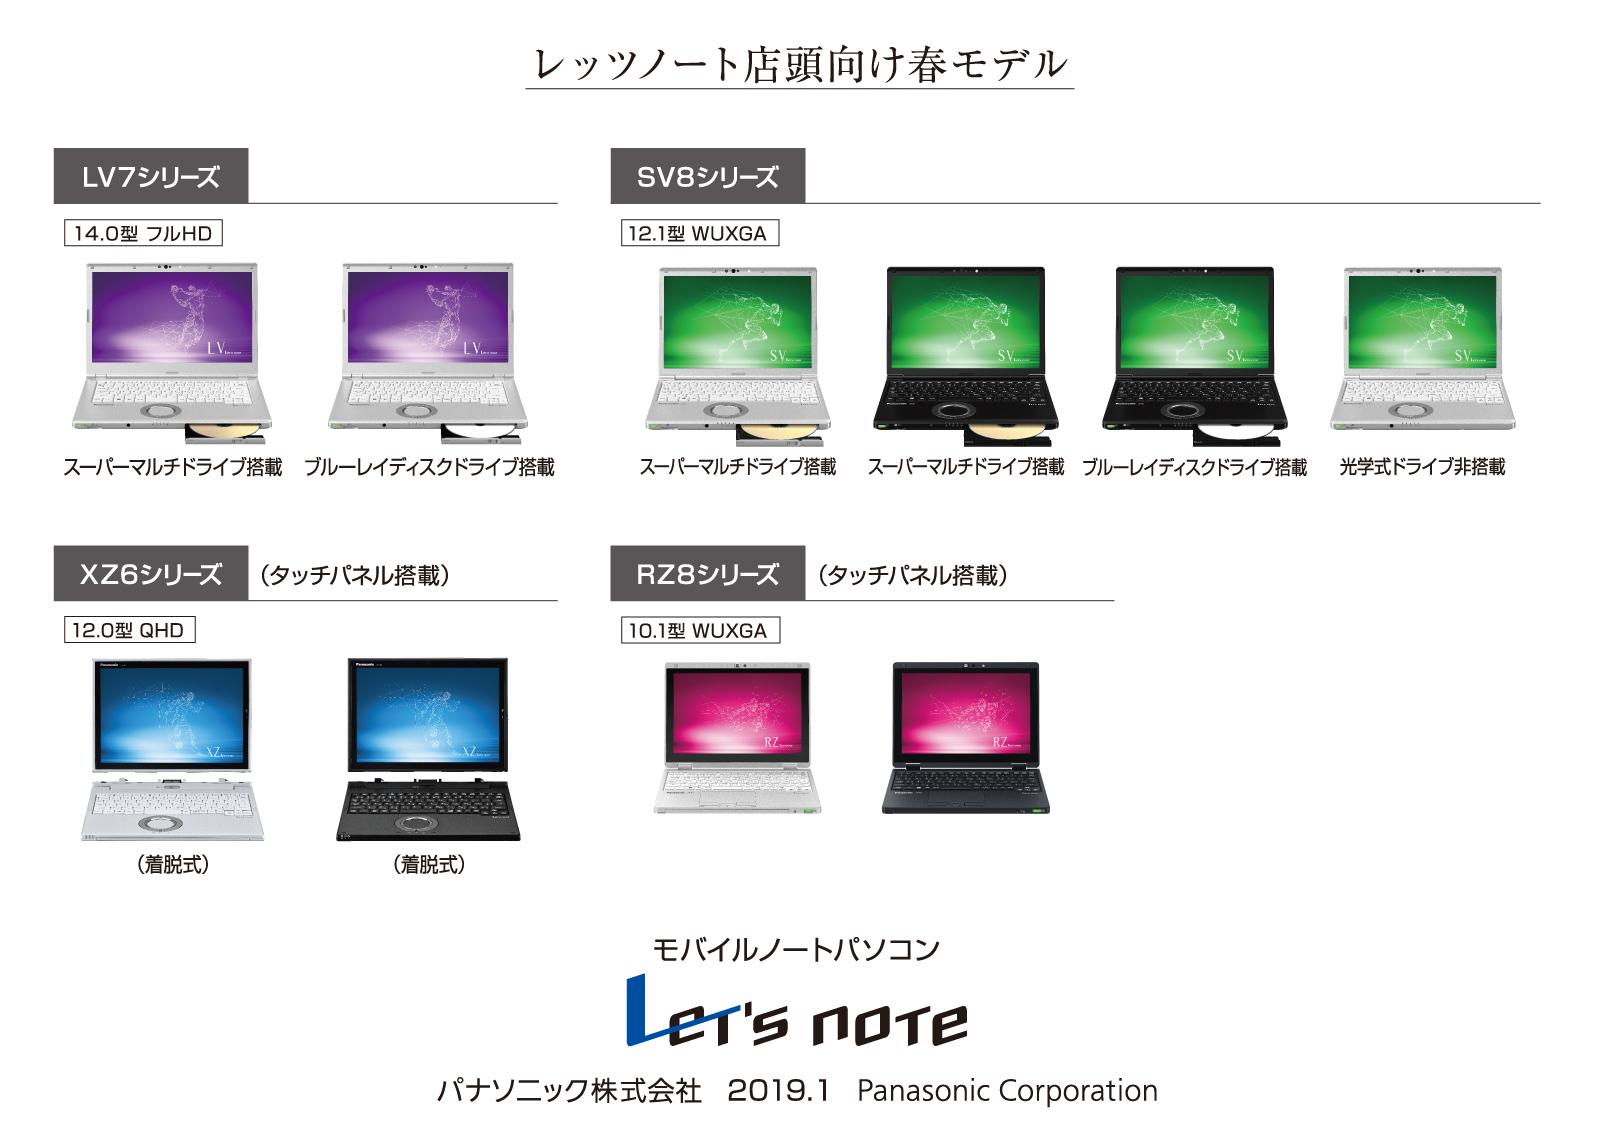 「Let's note」個人店頭向け春モデル